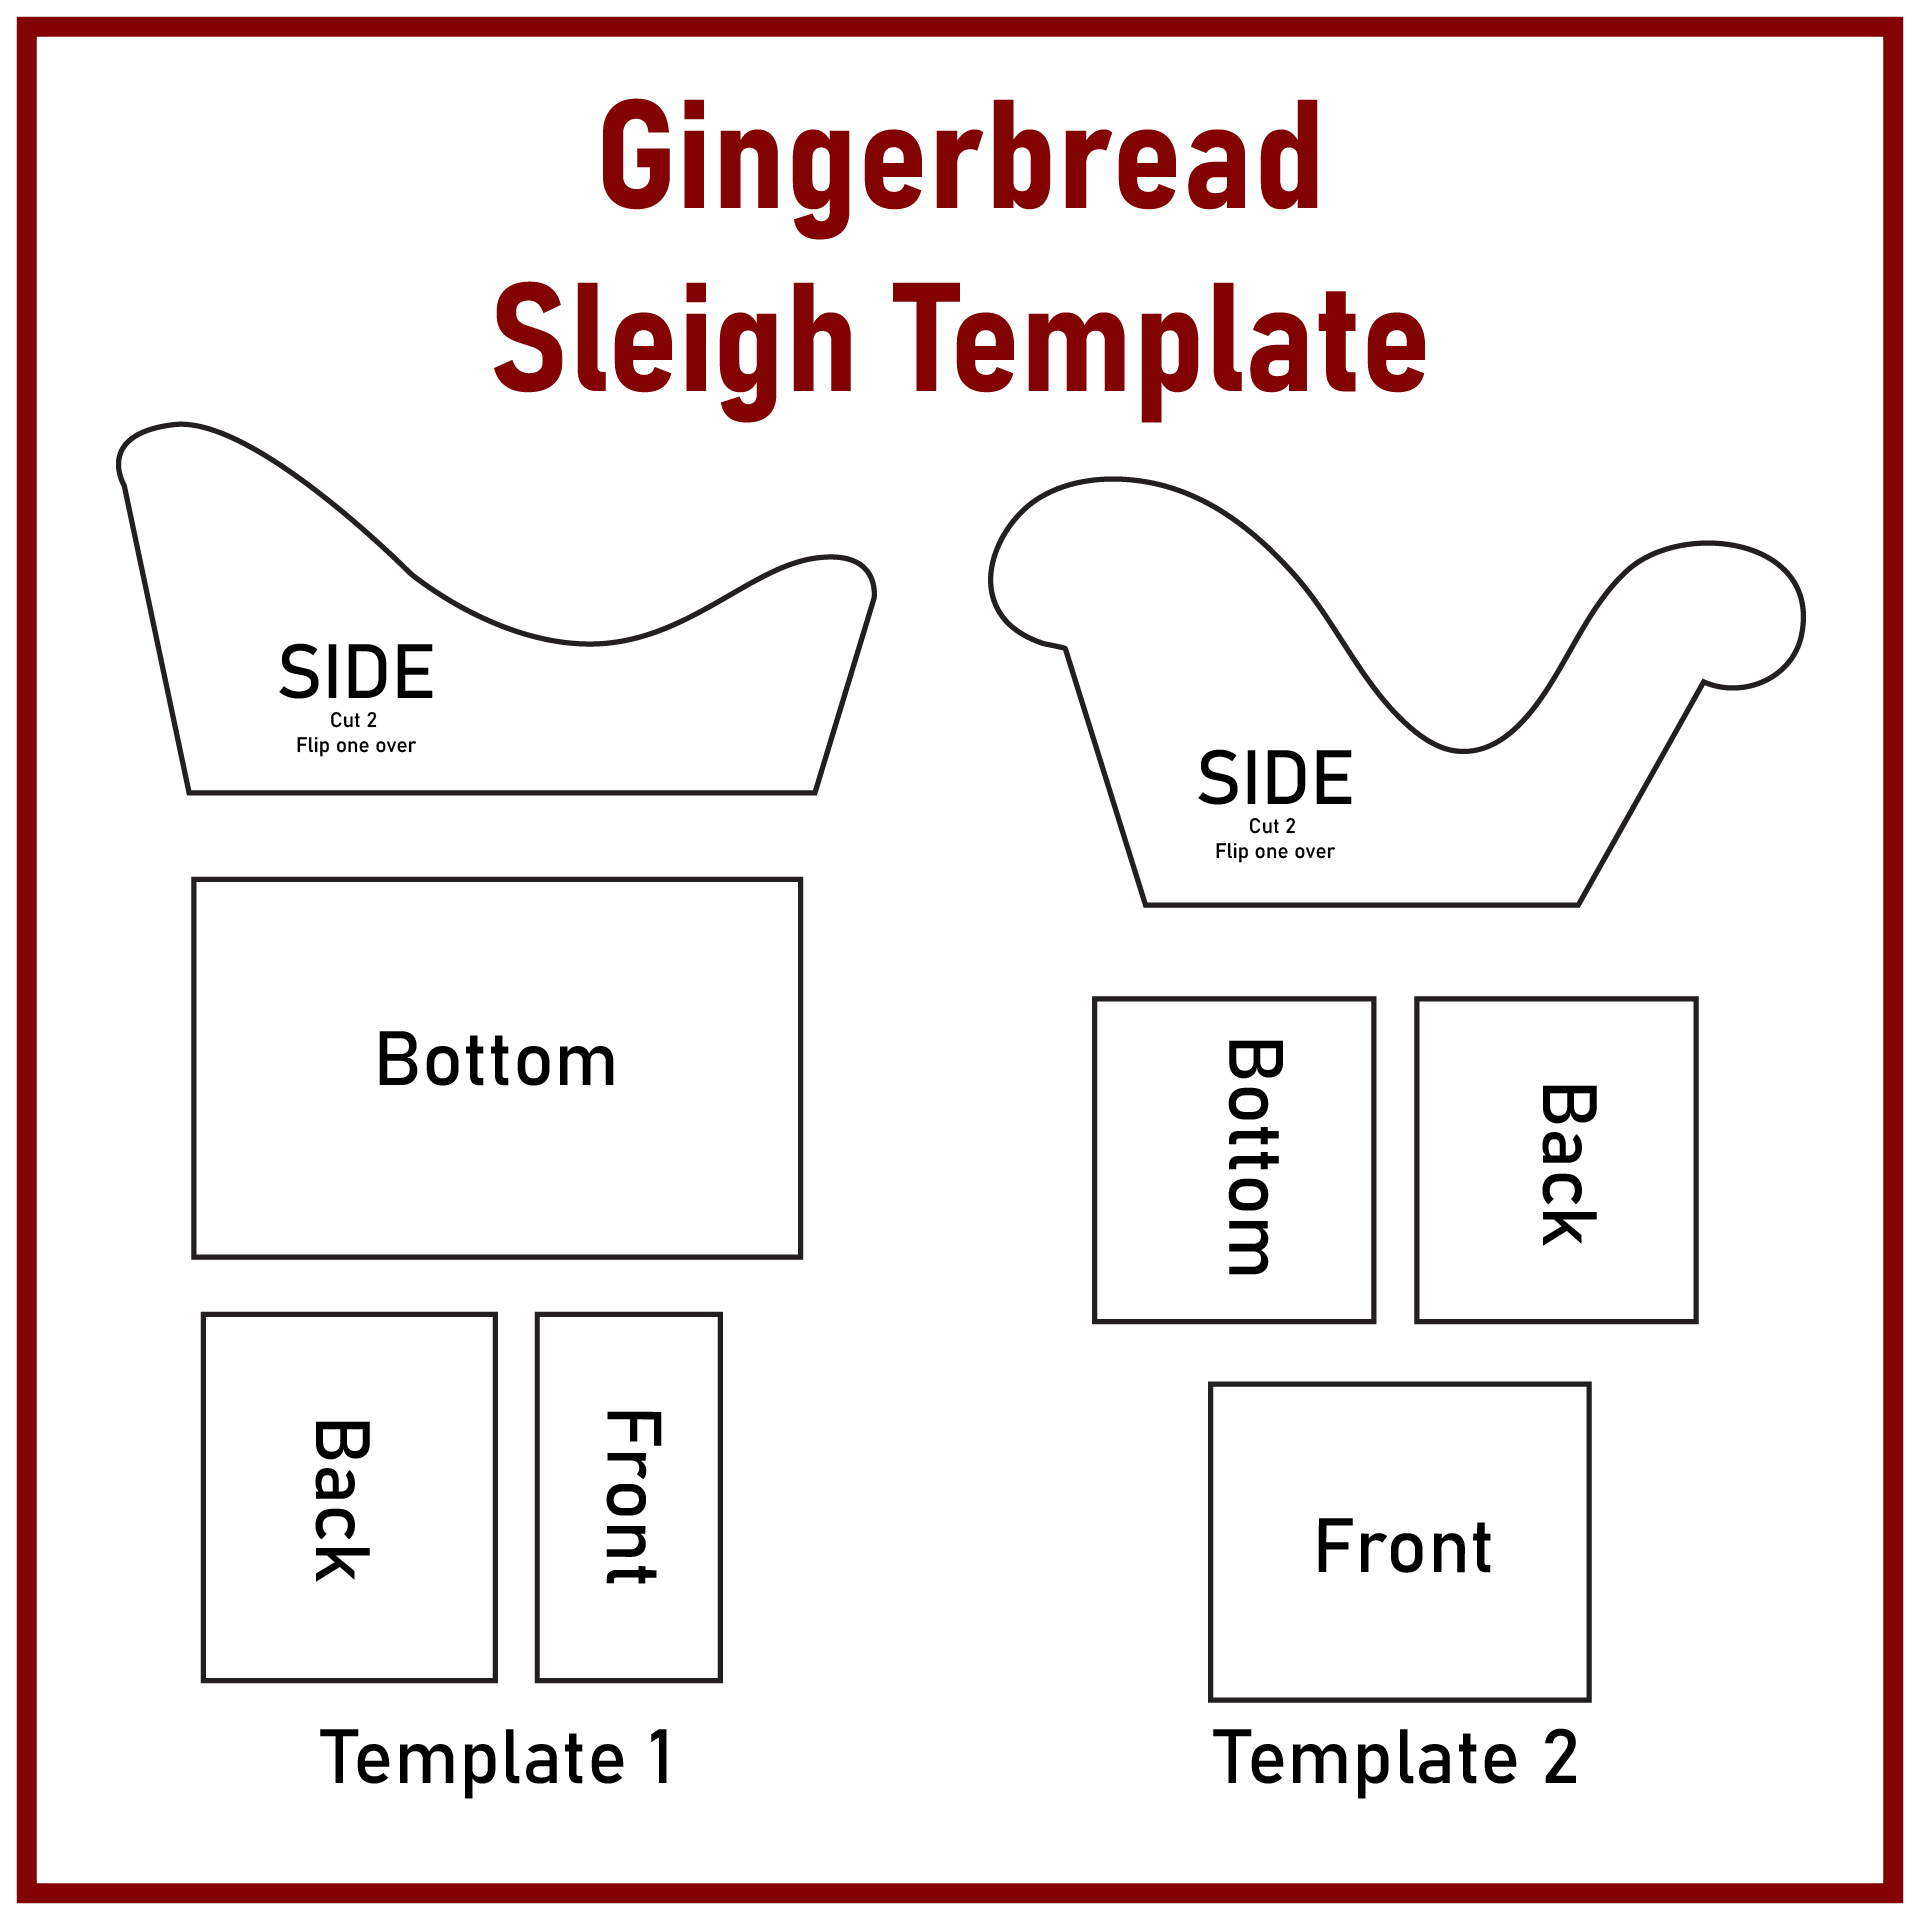 Gingerbread Sleigh Tutorial And Template